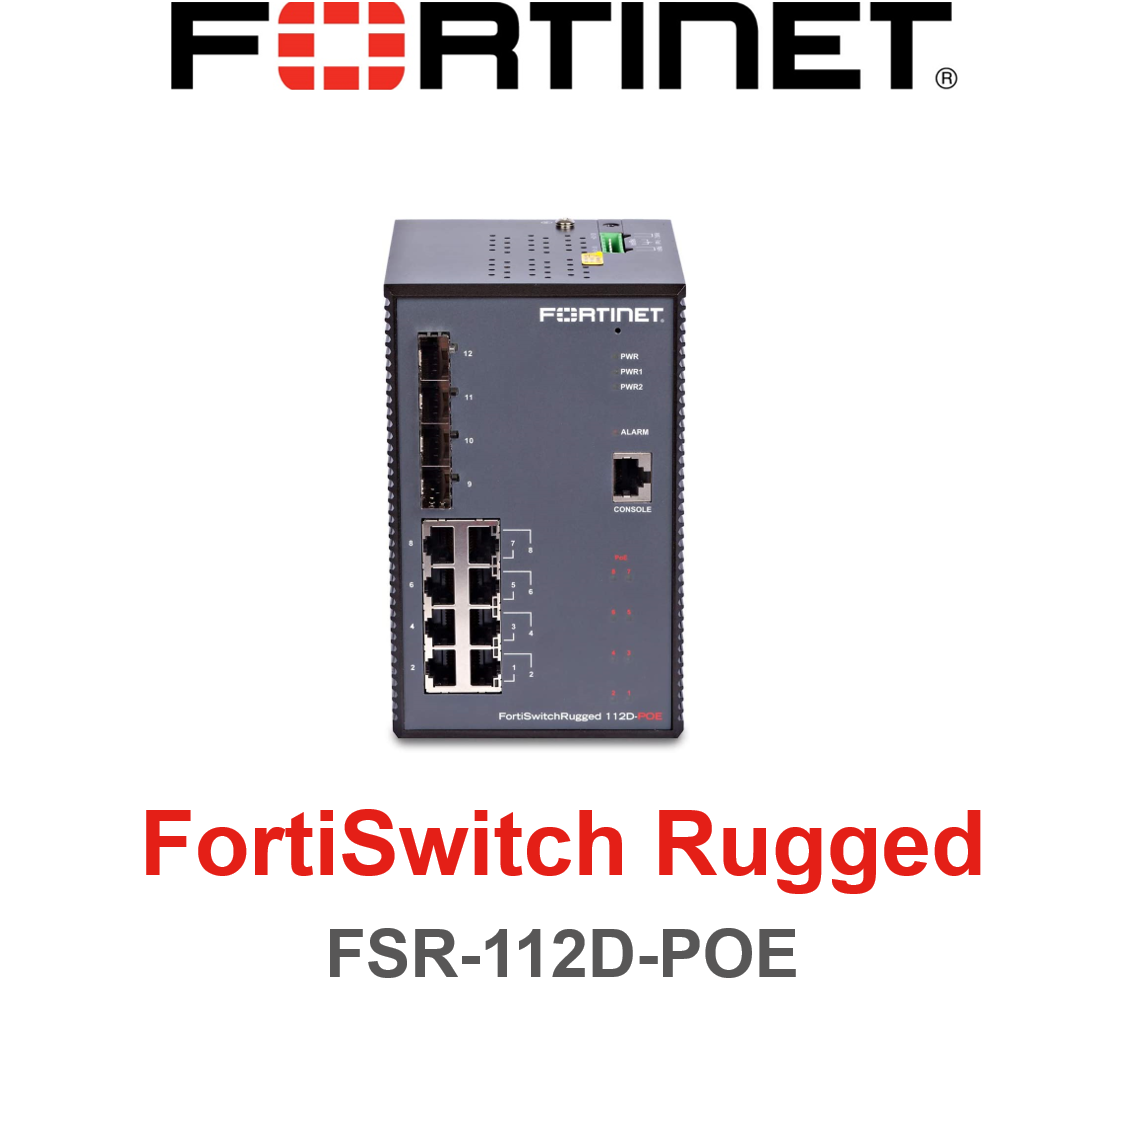 Fortinet FortiSwitch Rugged 112D